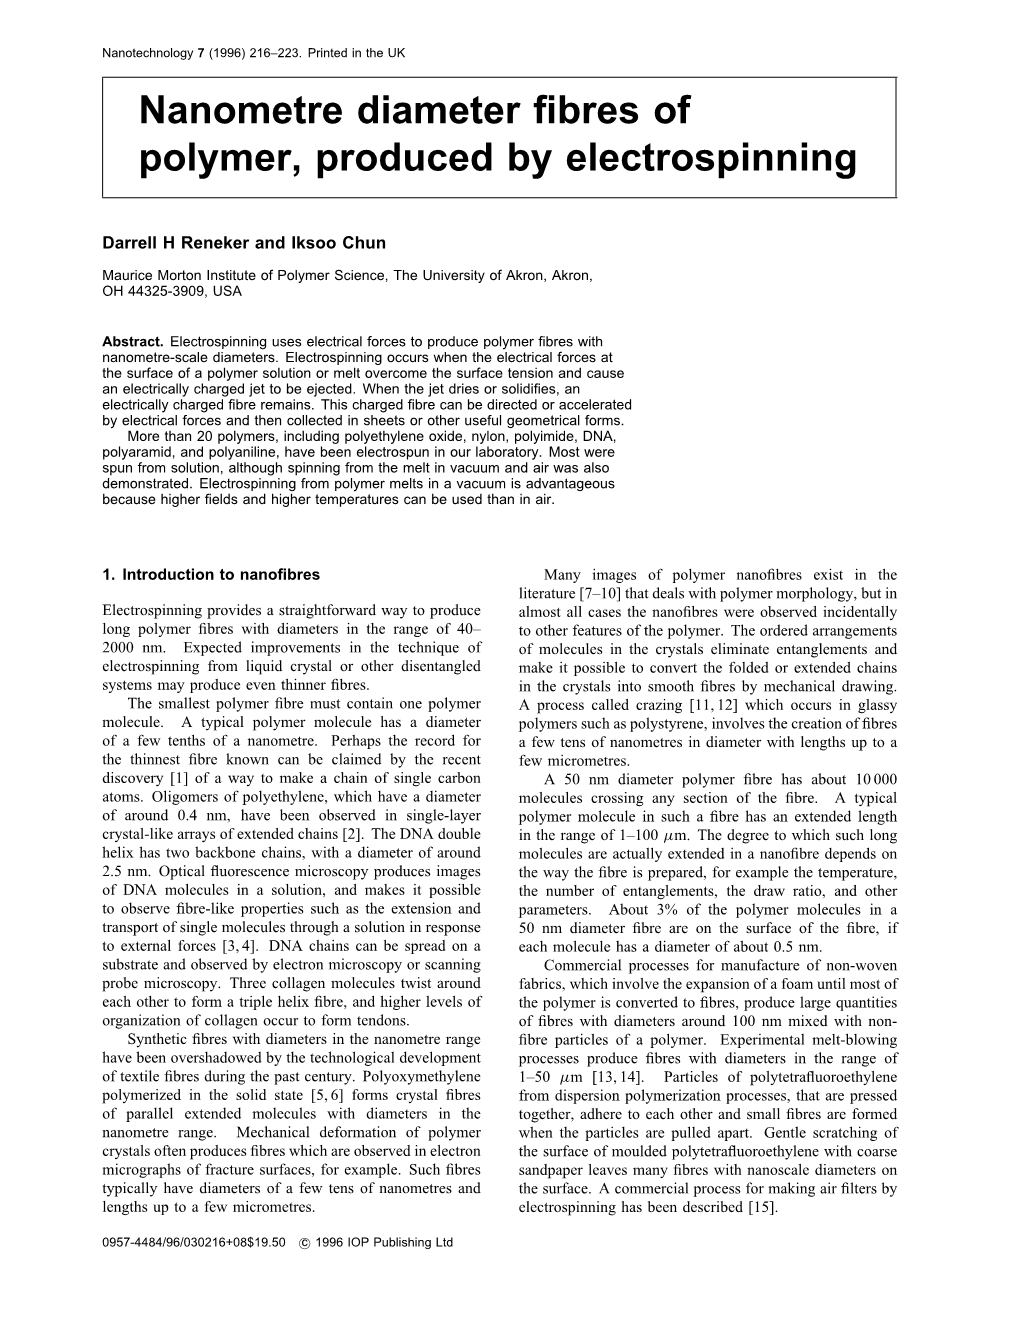 Nanometre Diameter Fibres of Polymer, Produced by Electrospinning